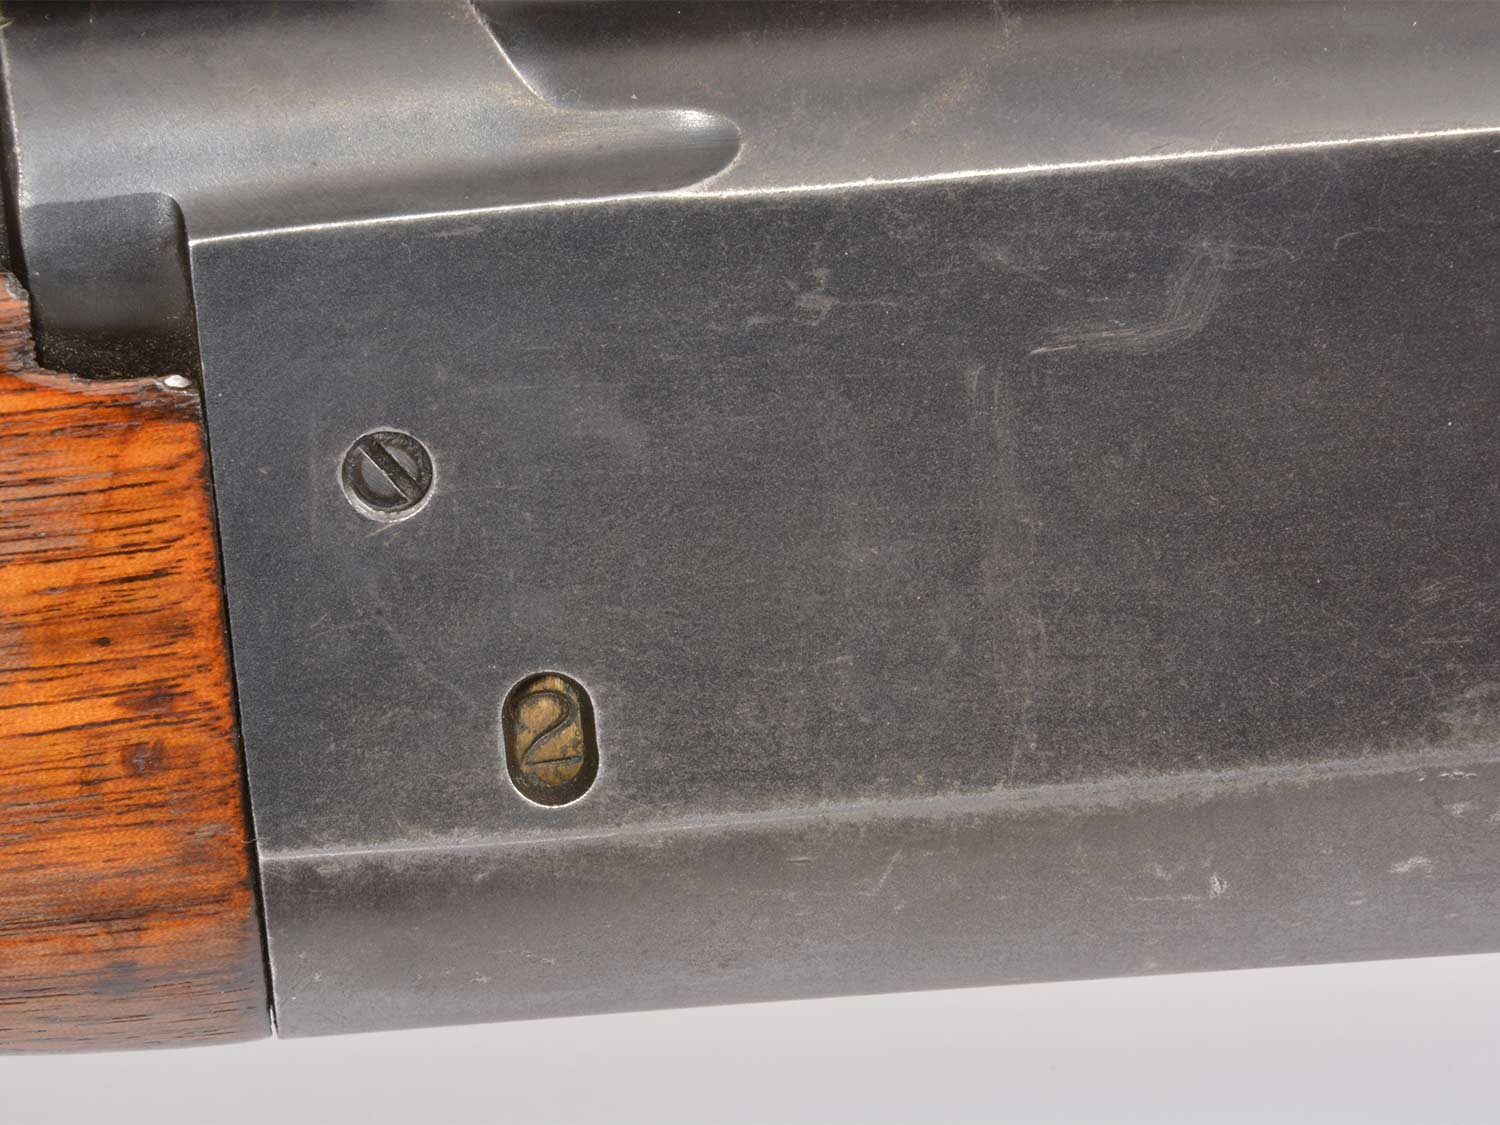 A rotary magazine indicator of remaining bullets in the side of the Savage Model 99 lever action rifle.